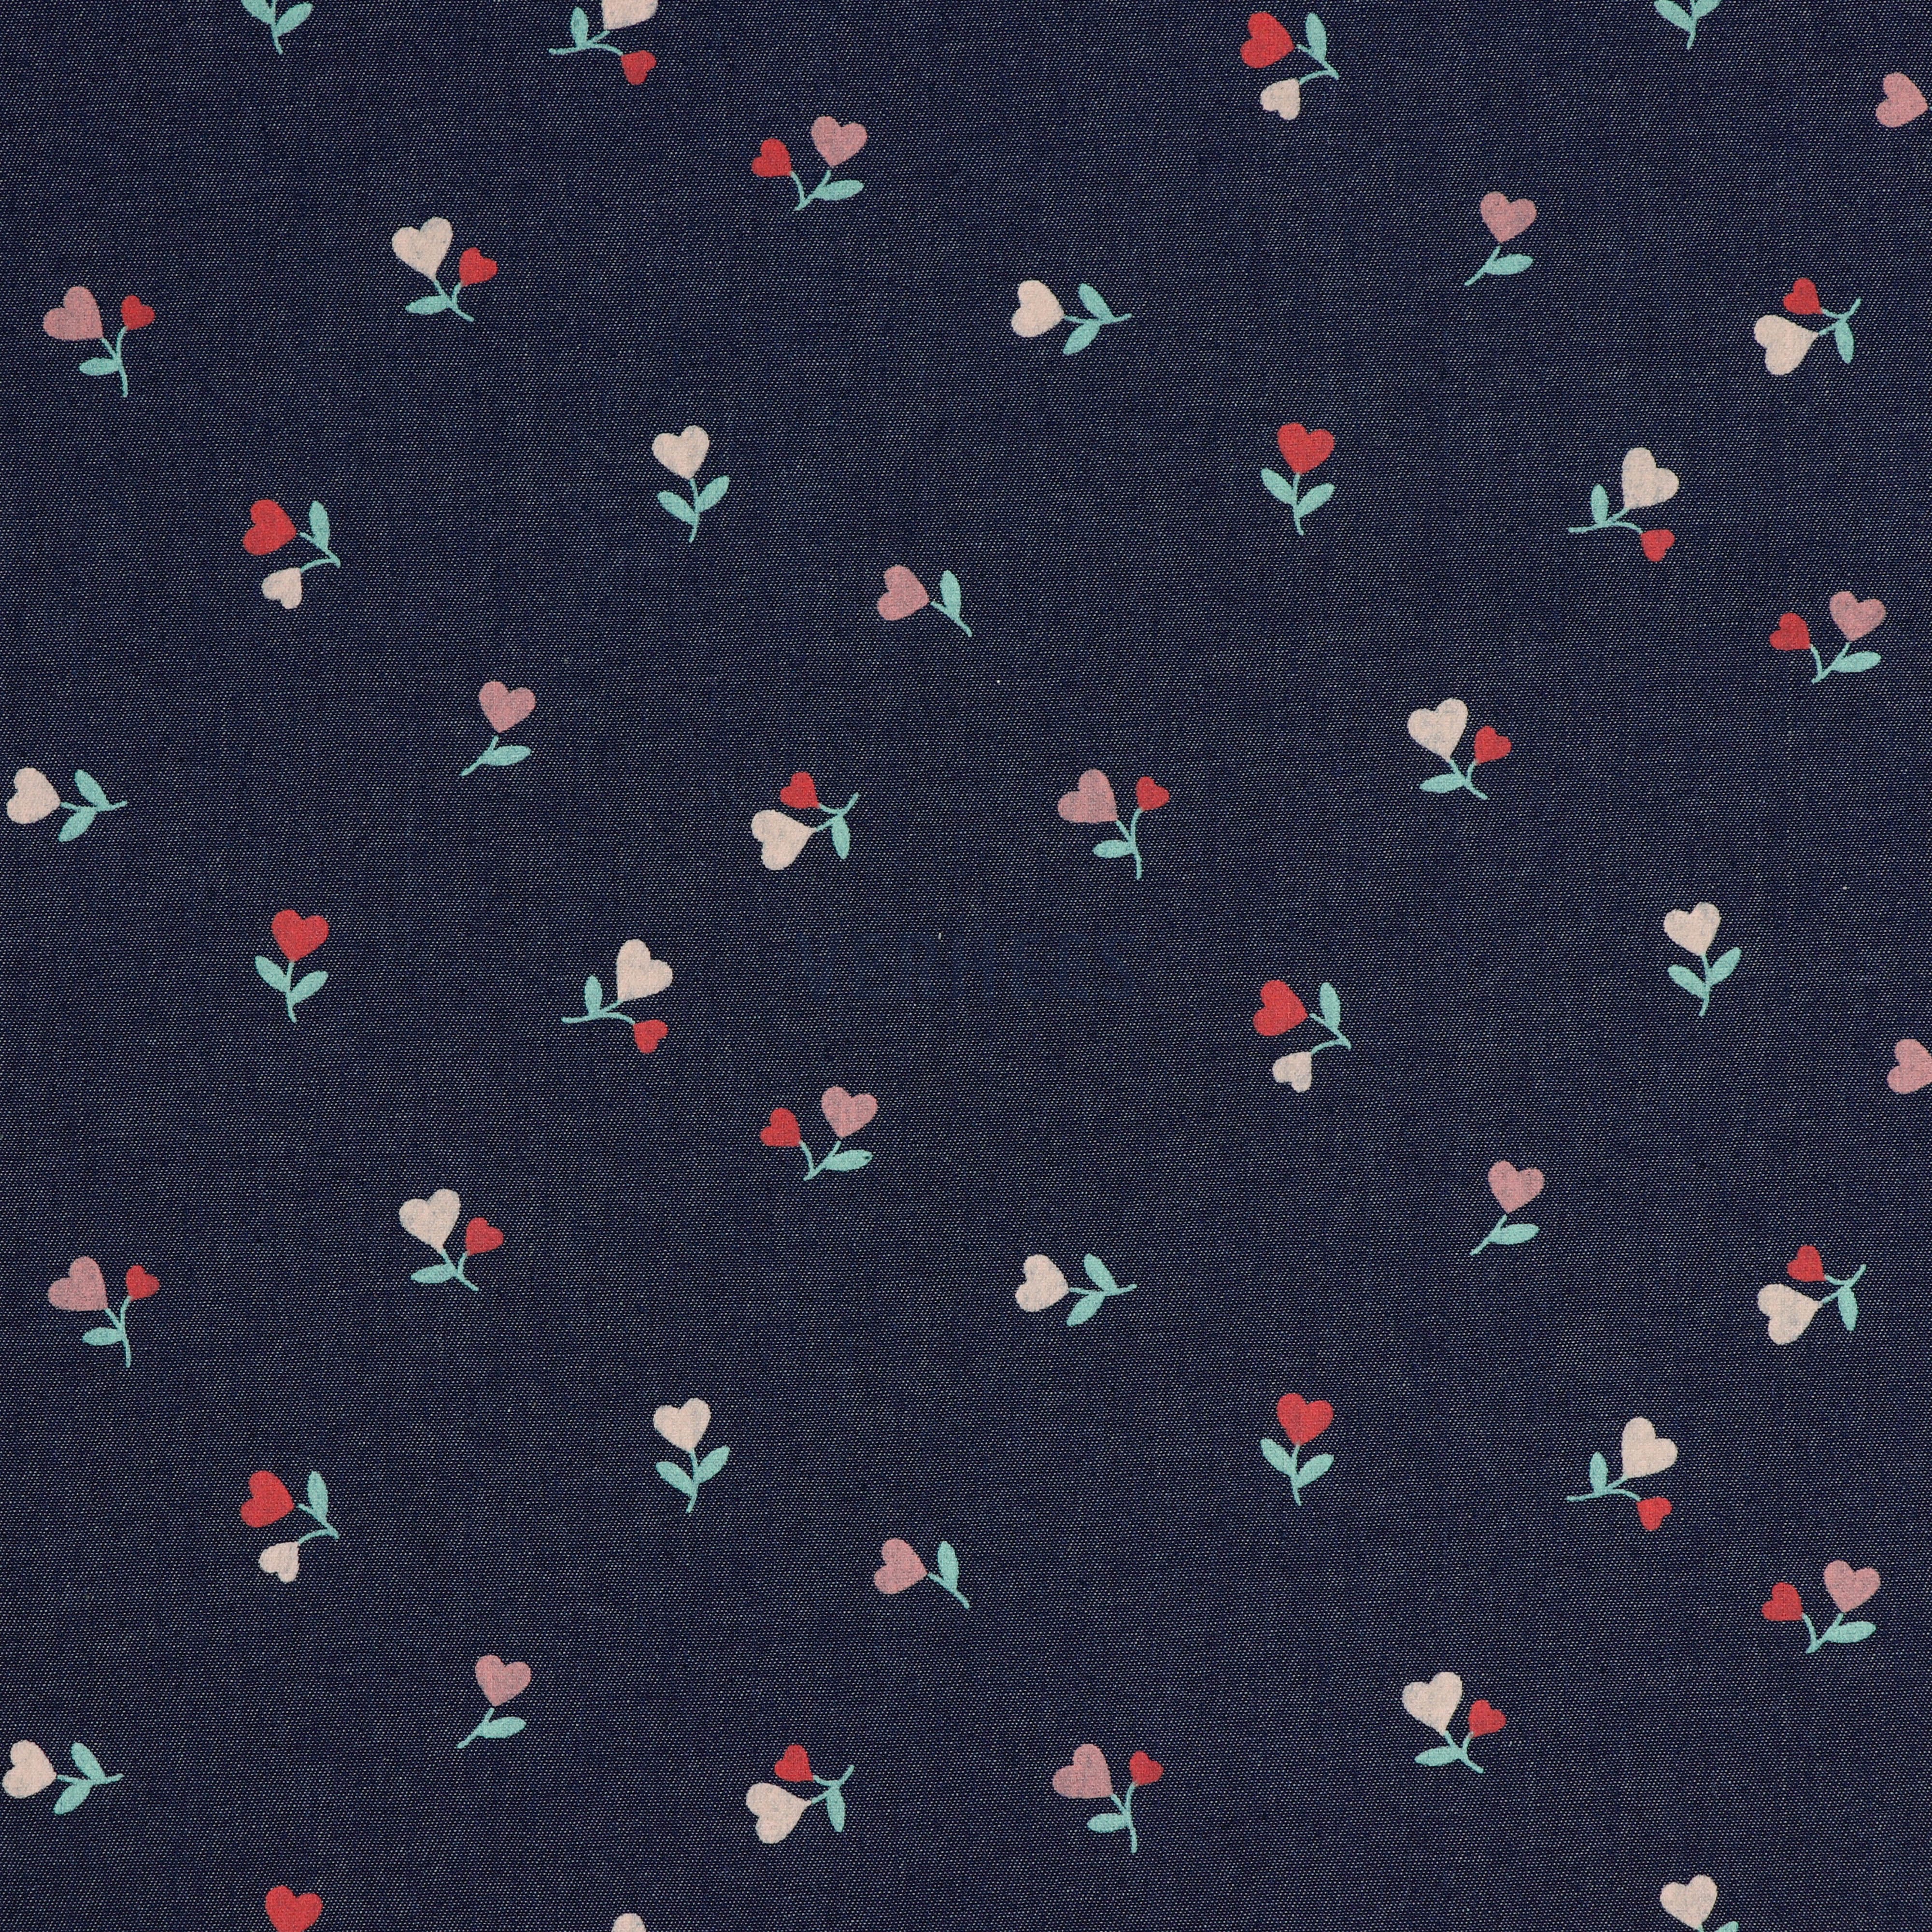 JEANS HEARTS JEANS WASHED (high resolution)